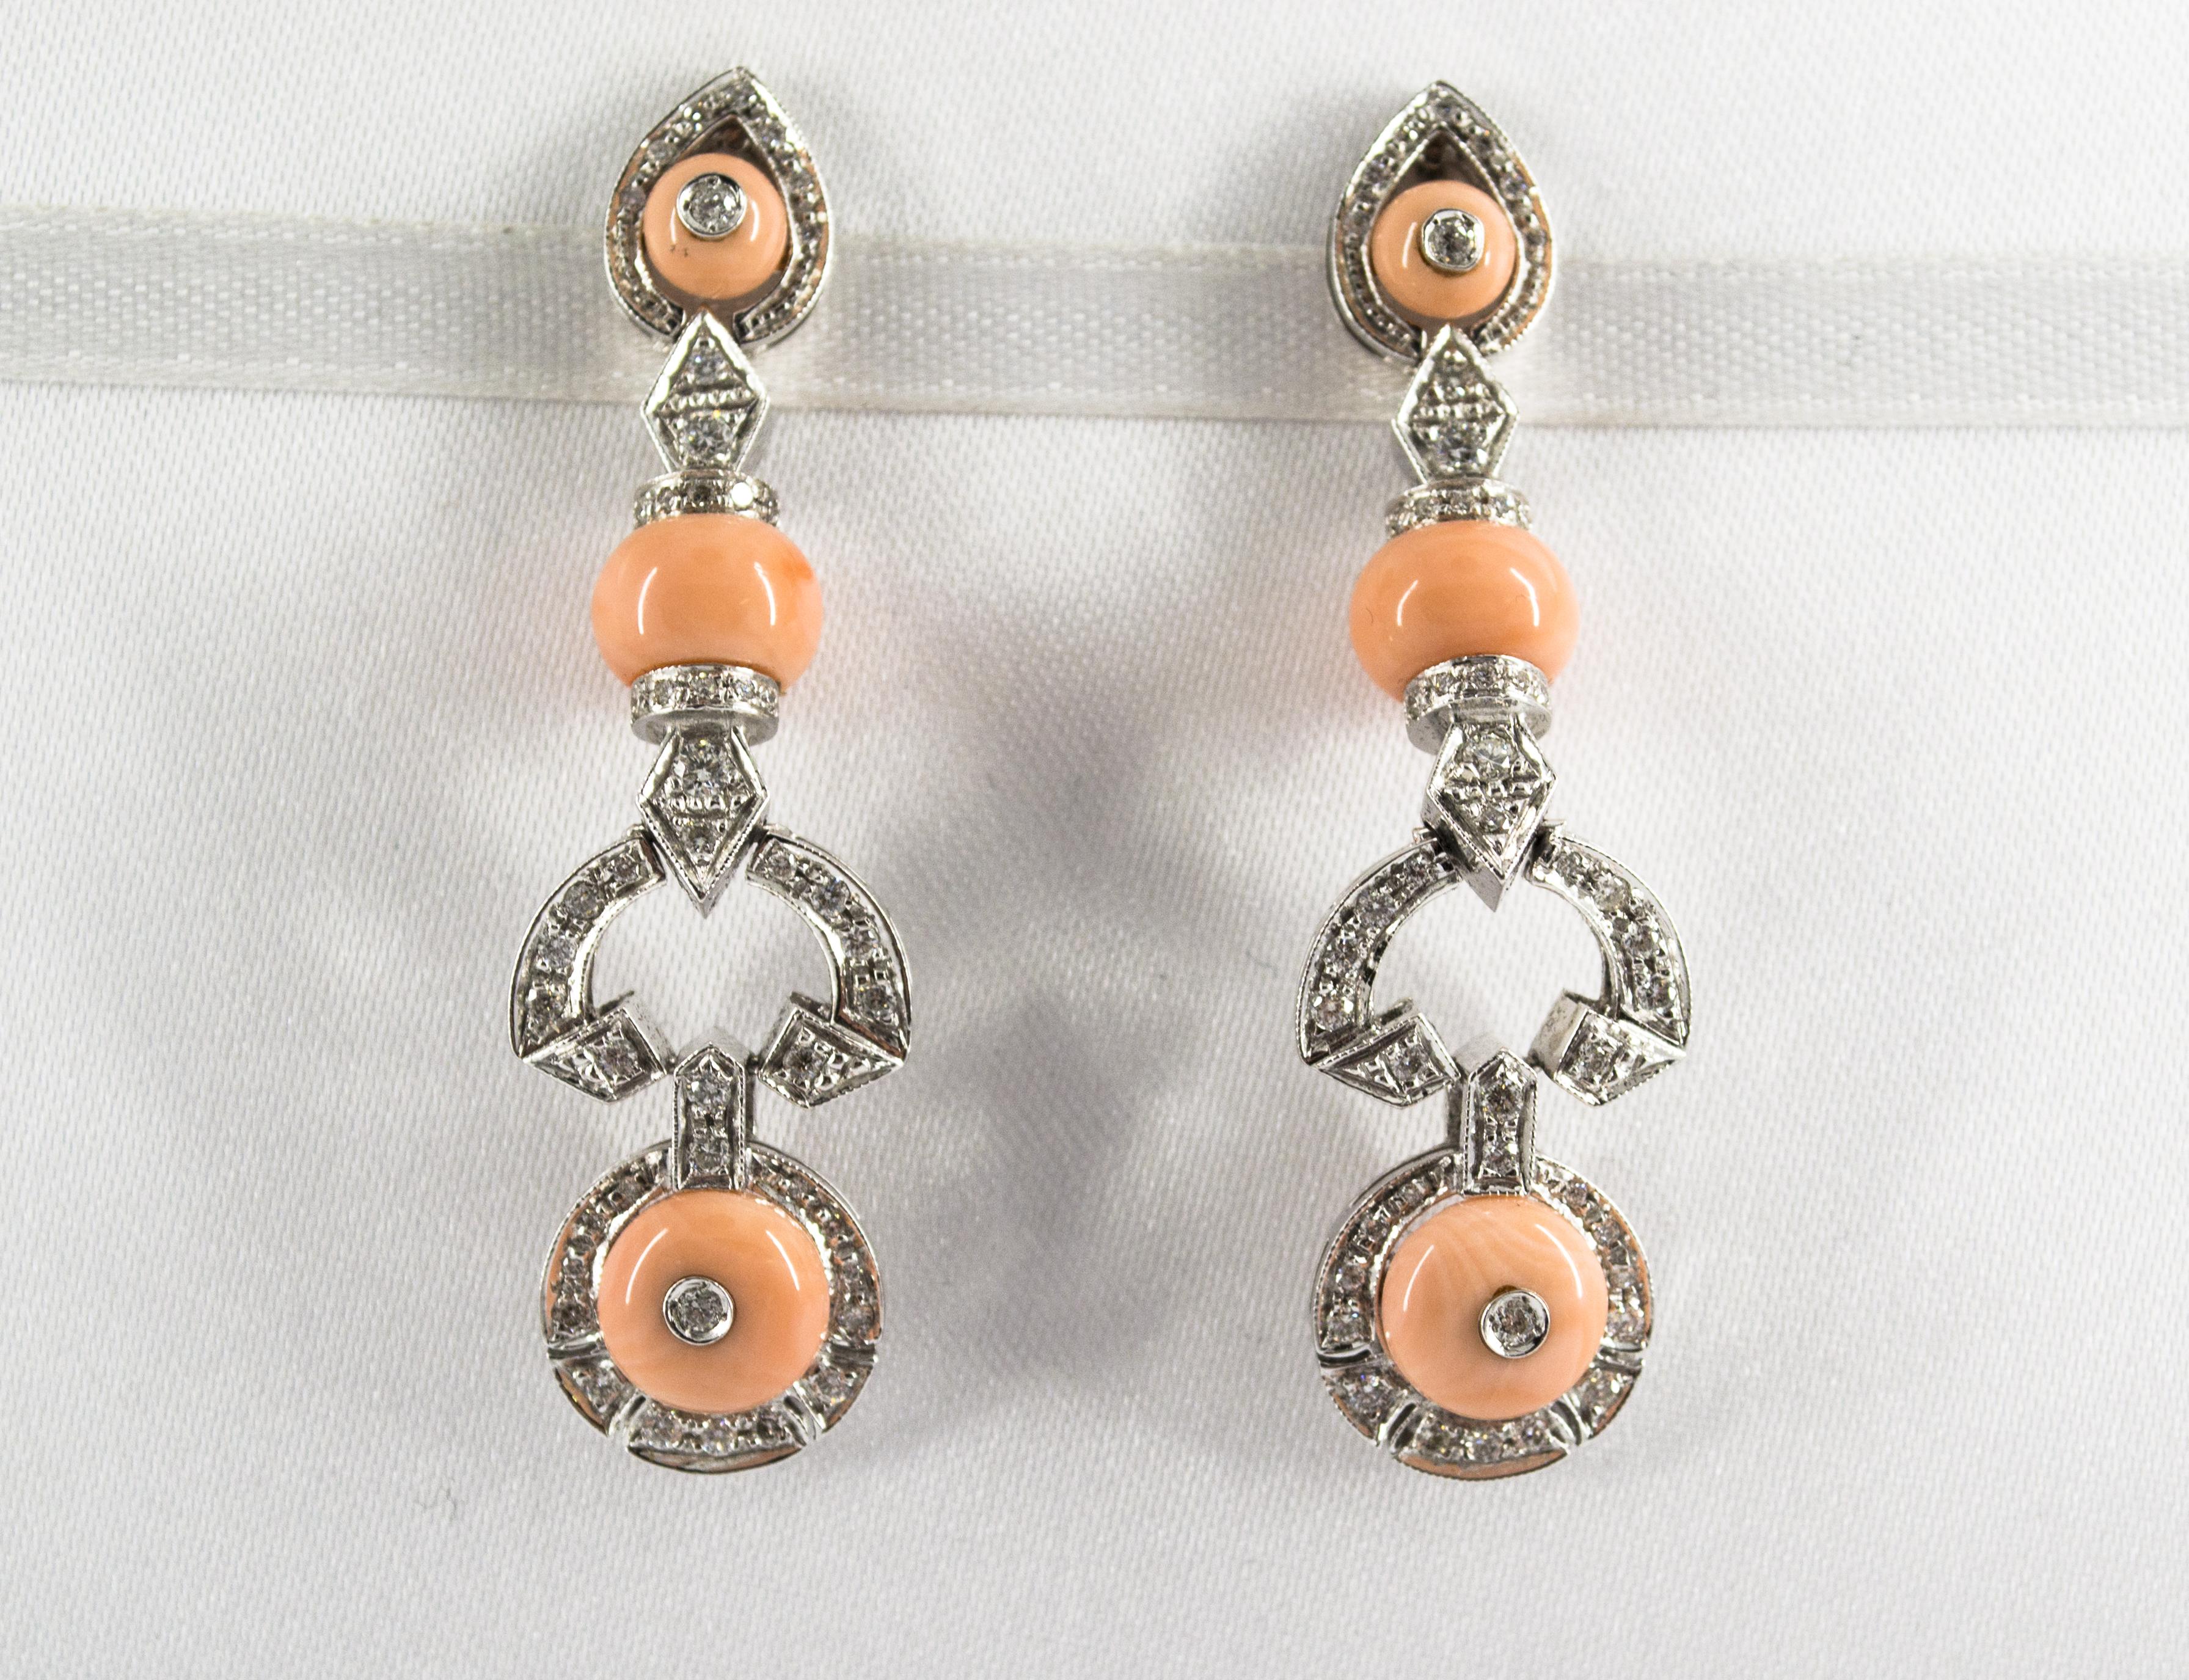 These Earrings are made of 9K White Gold.
These Earrings have 0.40 Carats of White Diamonds.
These Earrings have also Pink Coral.
All our Earrings have pins for pierced ears but we can change the closure and make any of our Earrings suitable even